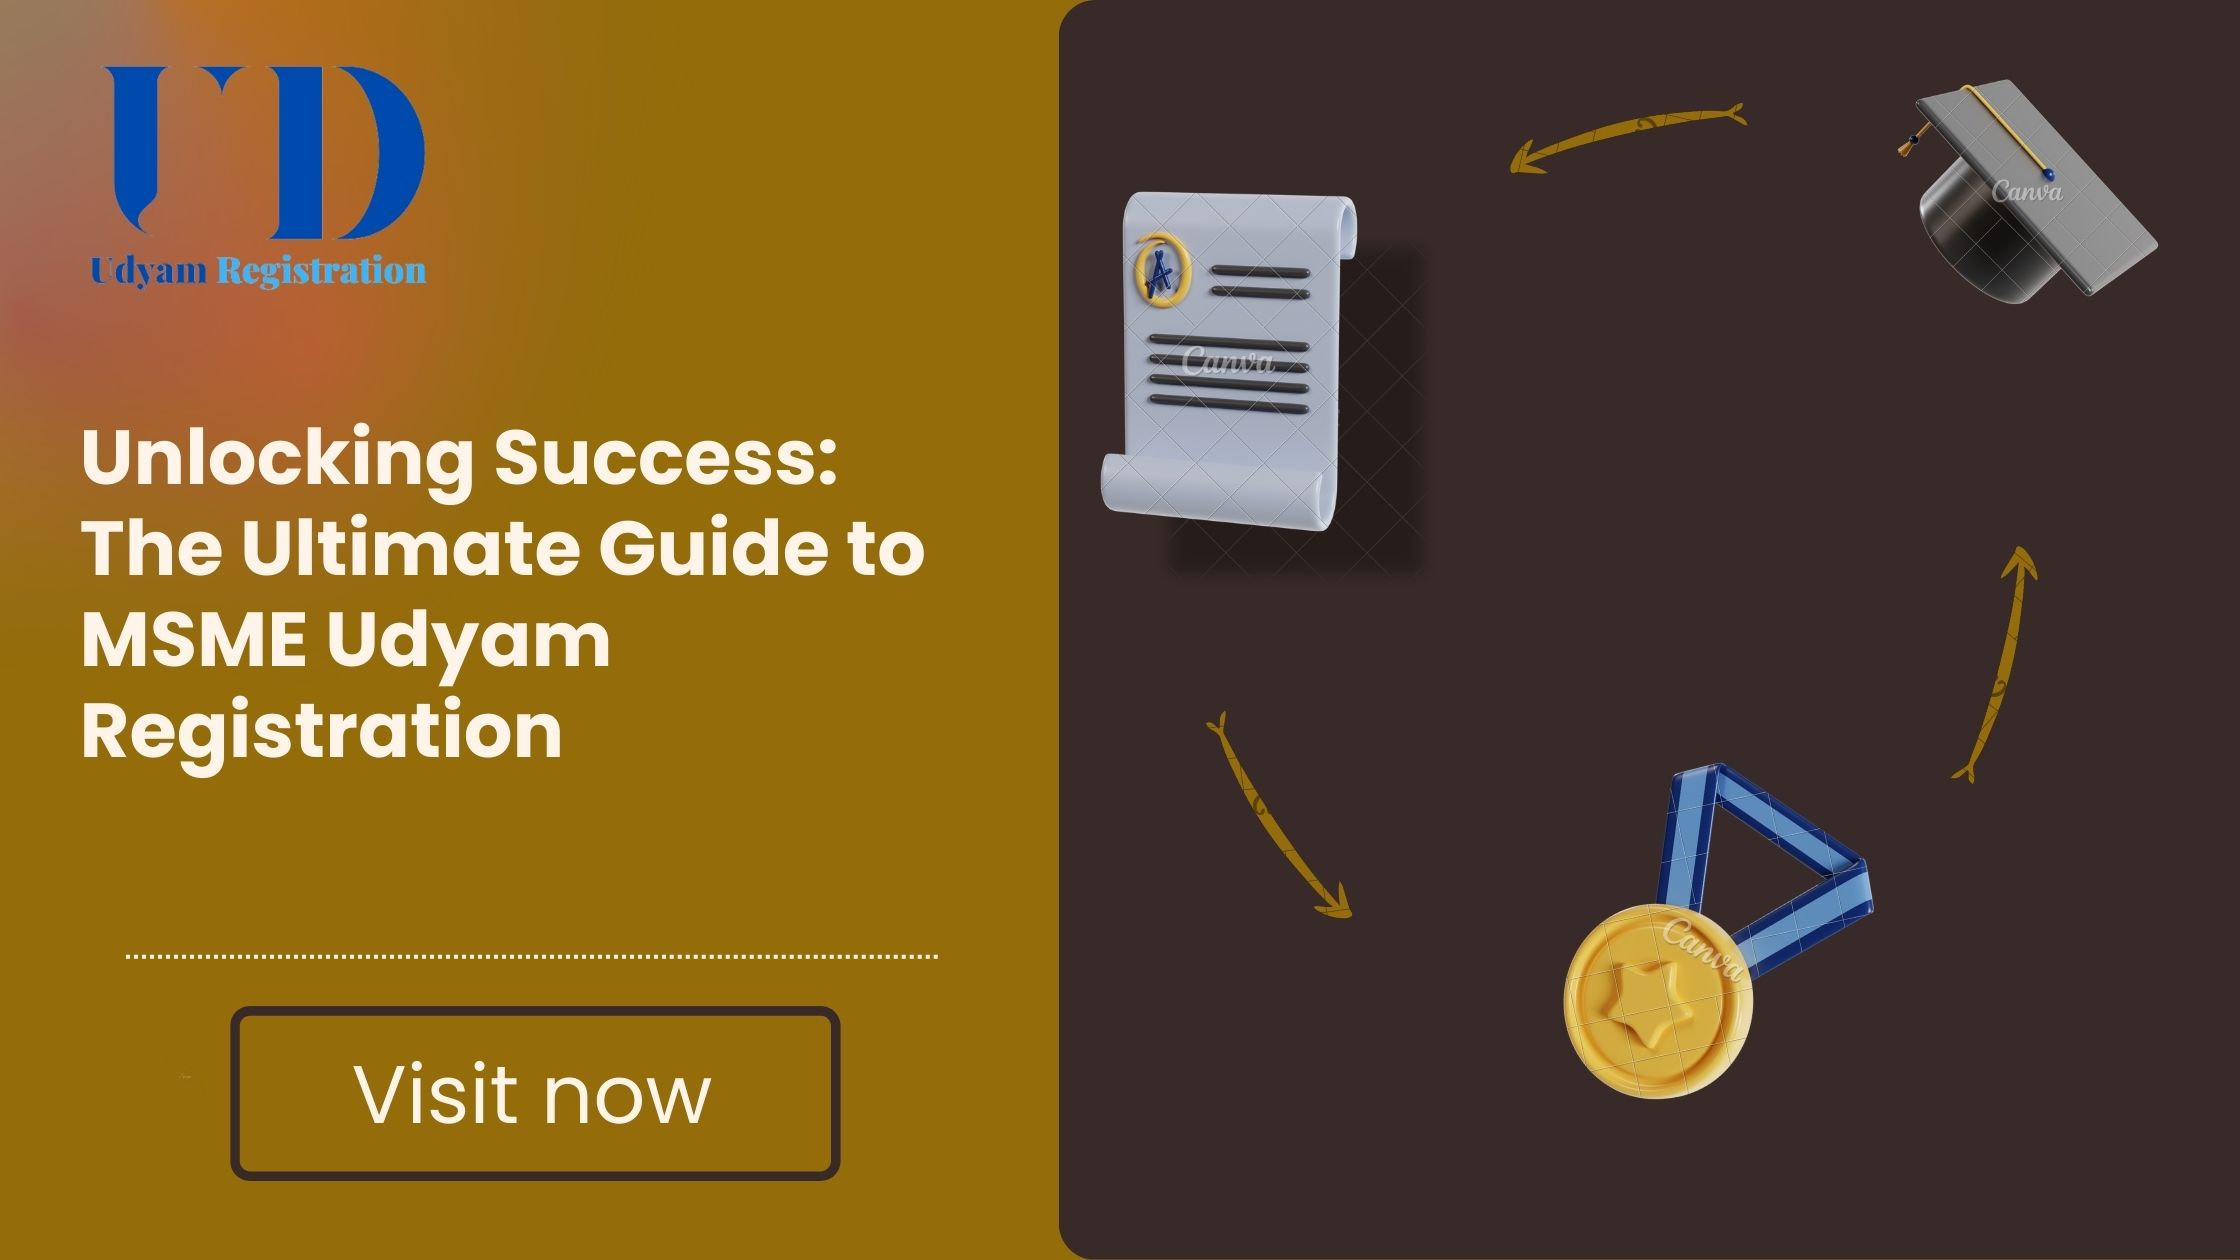 Unlocking Success: The Ultimate Guide to MSME Udyam Registration